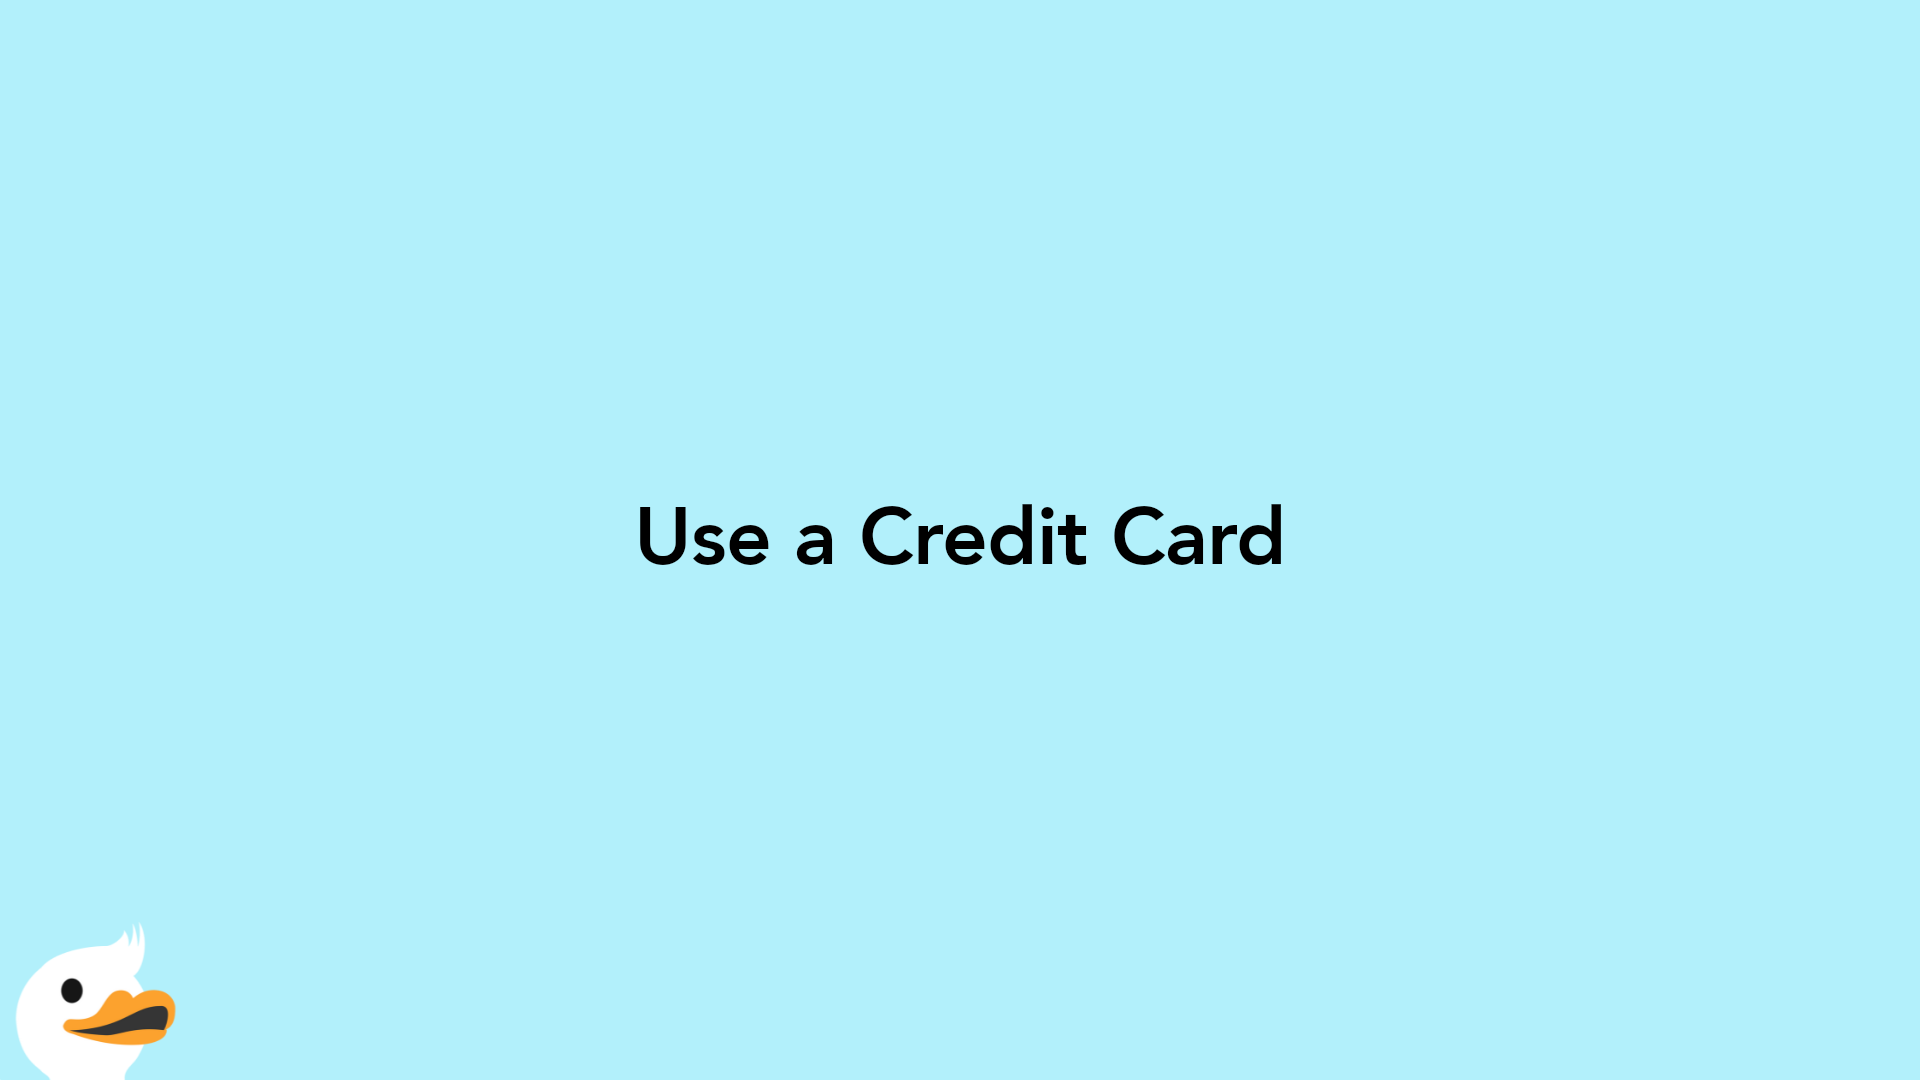 Use a Credit Card